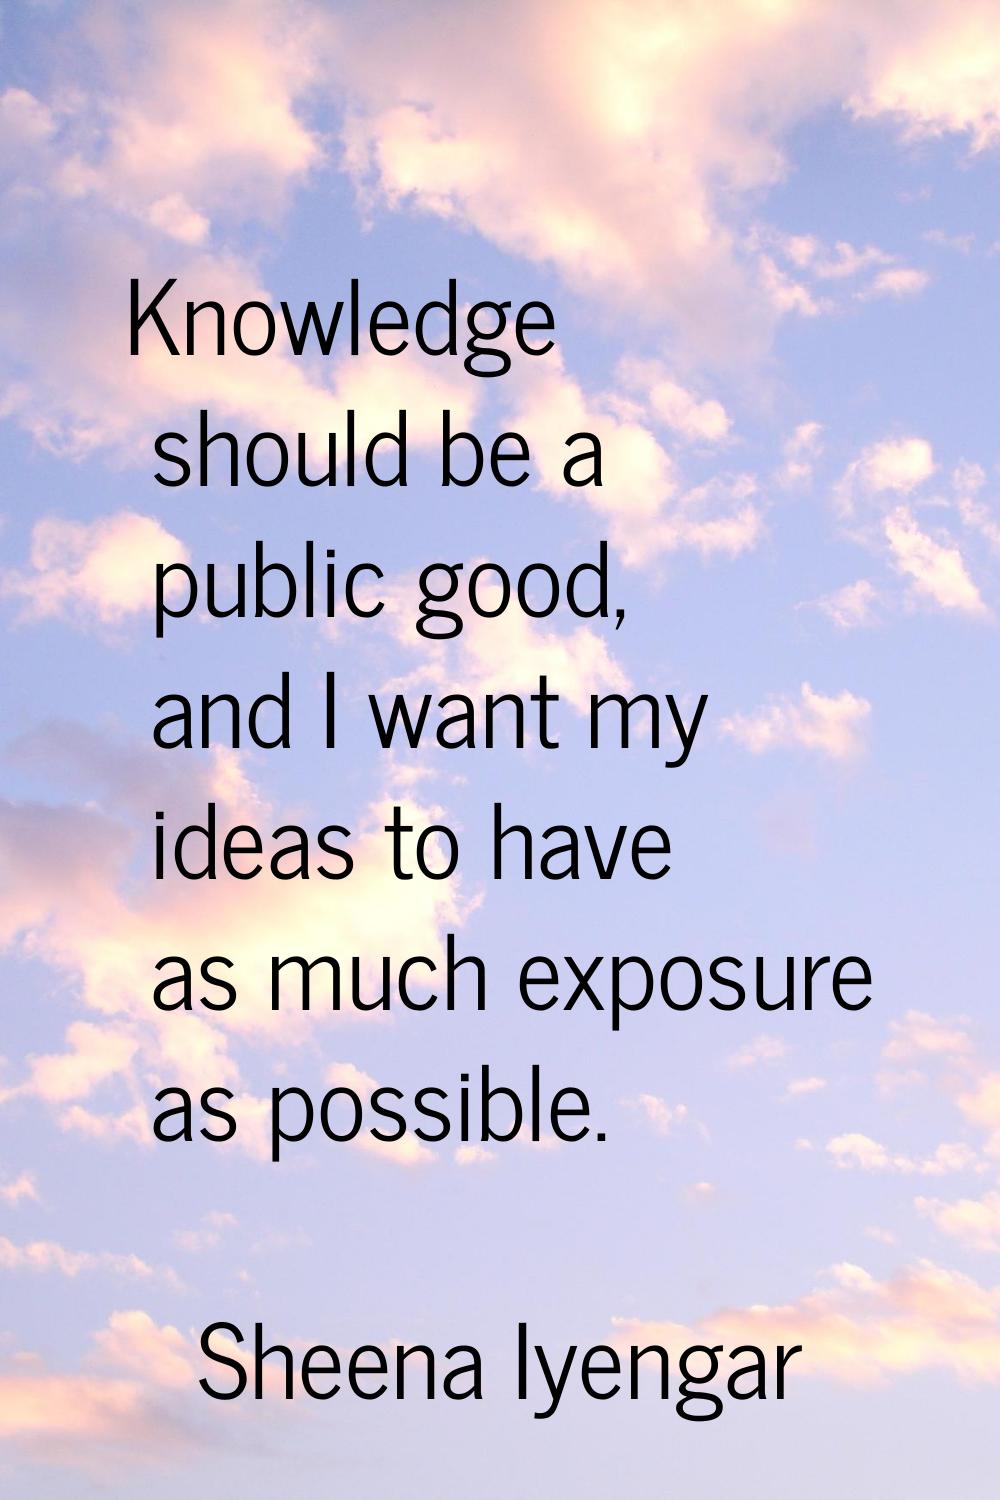 Knowledge should be a public good, and I want my ideas to have as much exposure as possible.